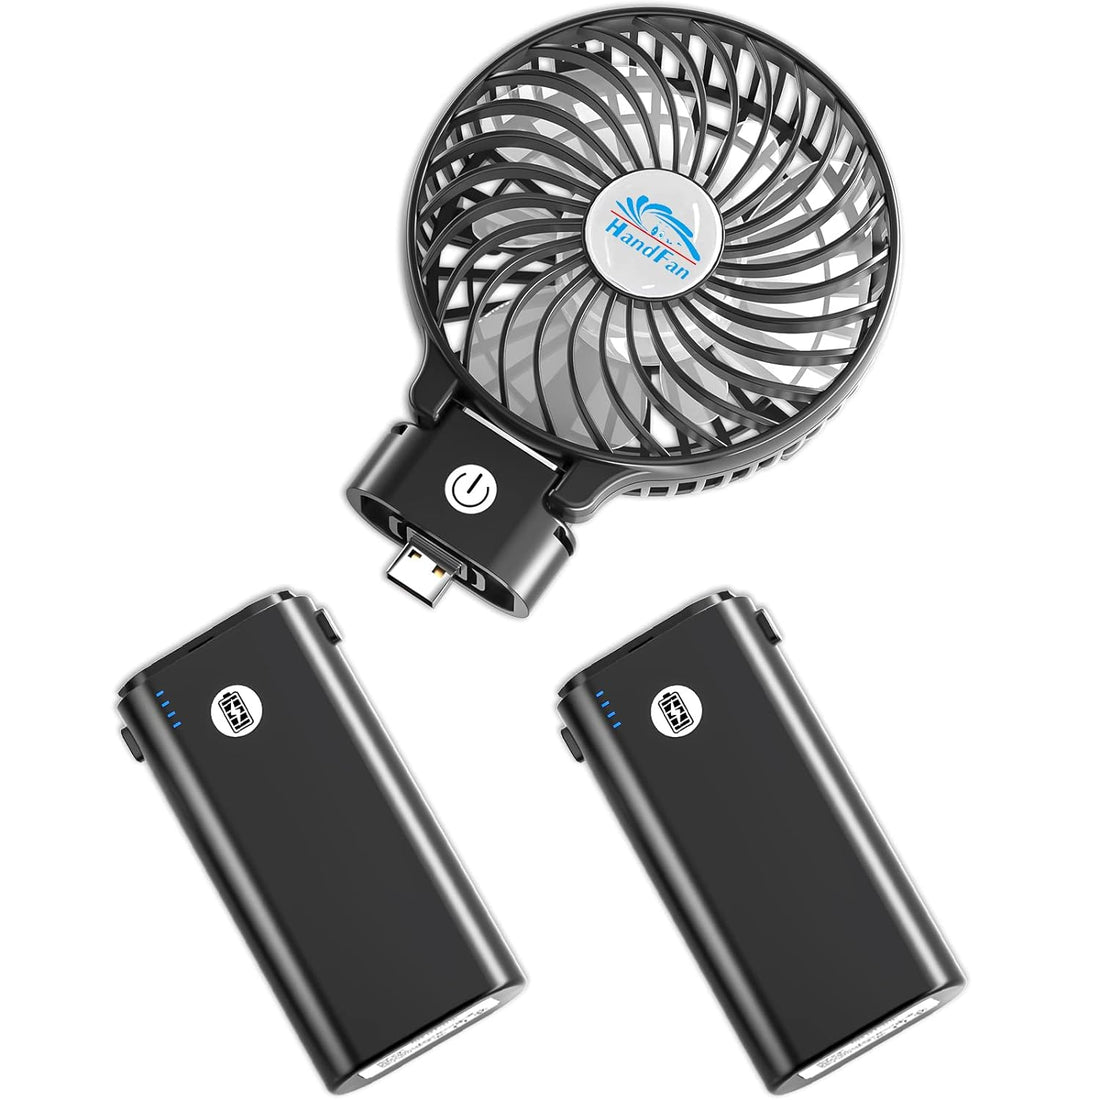 HandFan 10400mAh Portable Handheld Fan with Power Bank, Small Personal Fan, Foldable Mini Desk Fan, Cooling Electric Fan for Travel, Outdoors, Indoors(Transparent Blade)